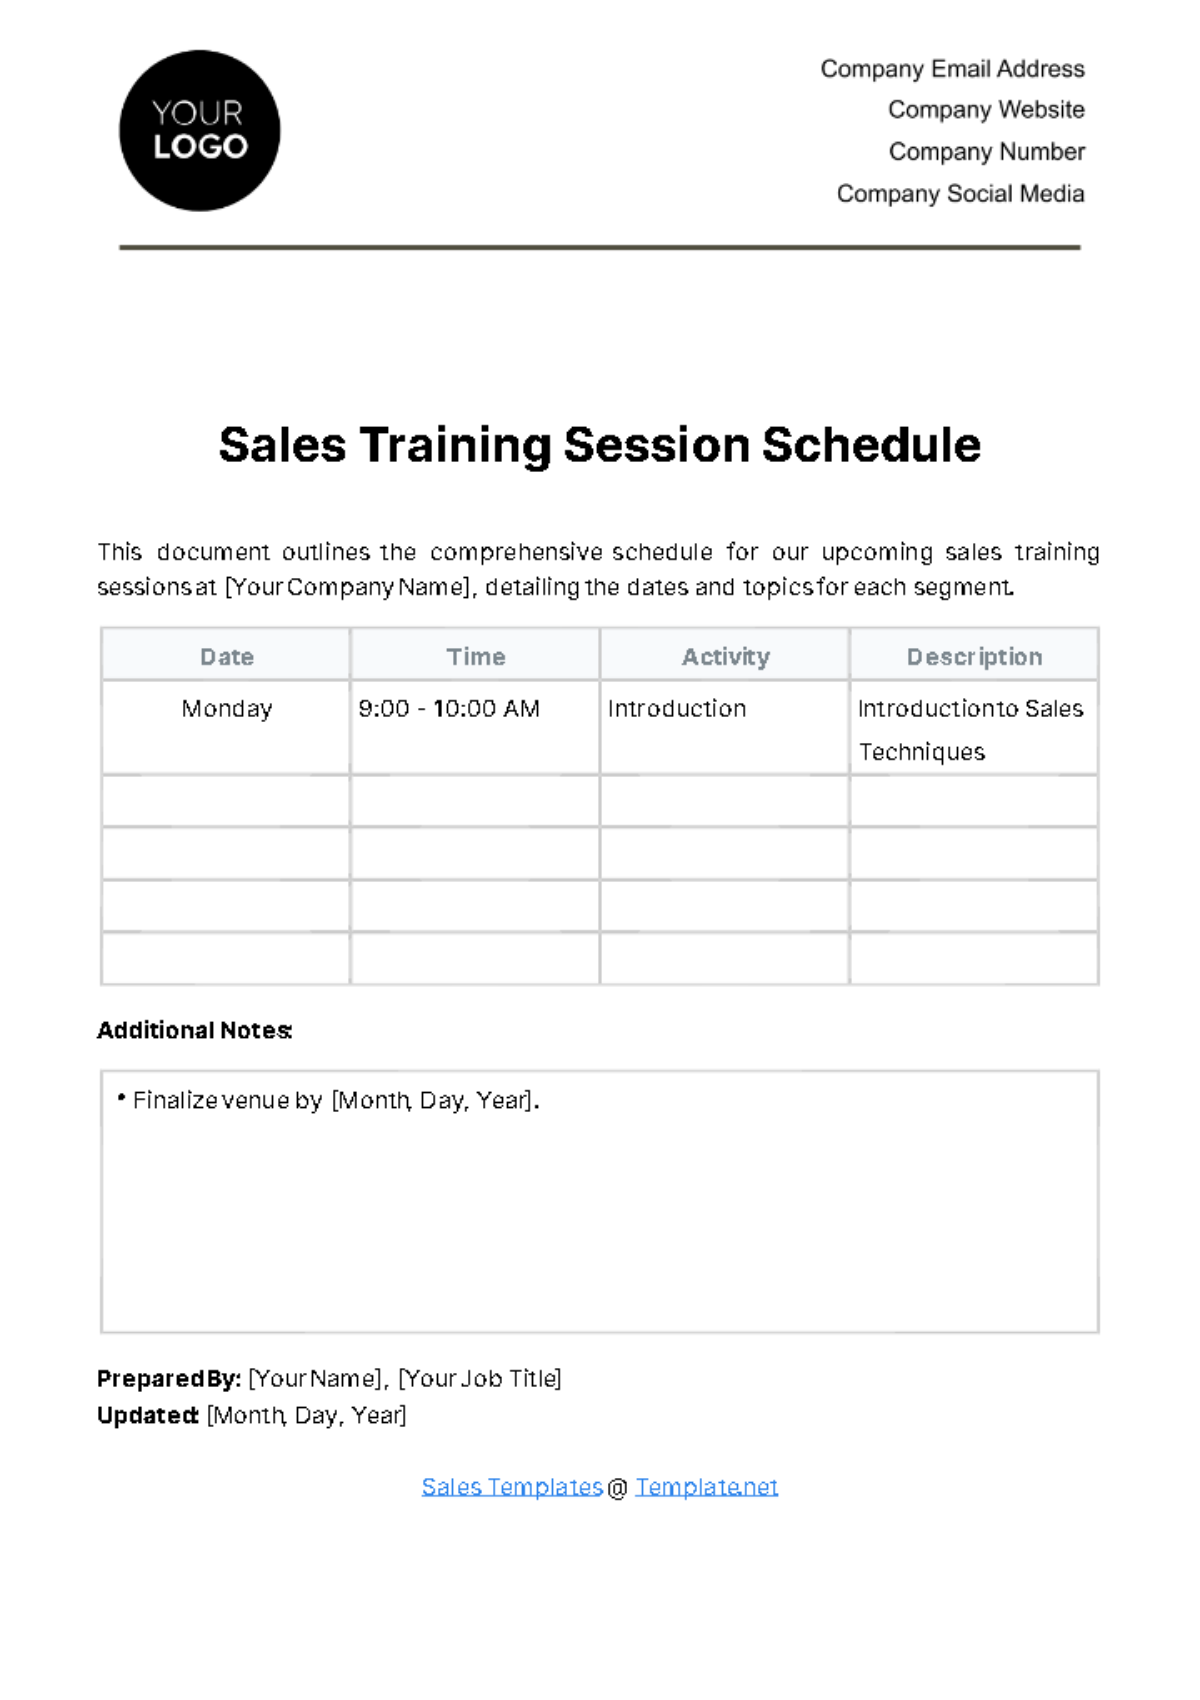 Free Sales Training Session Schedule Template